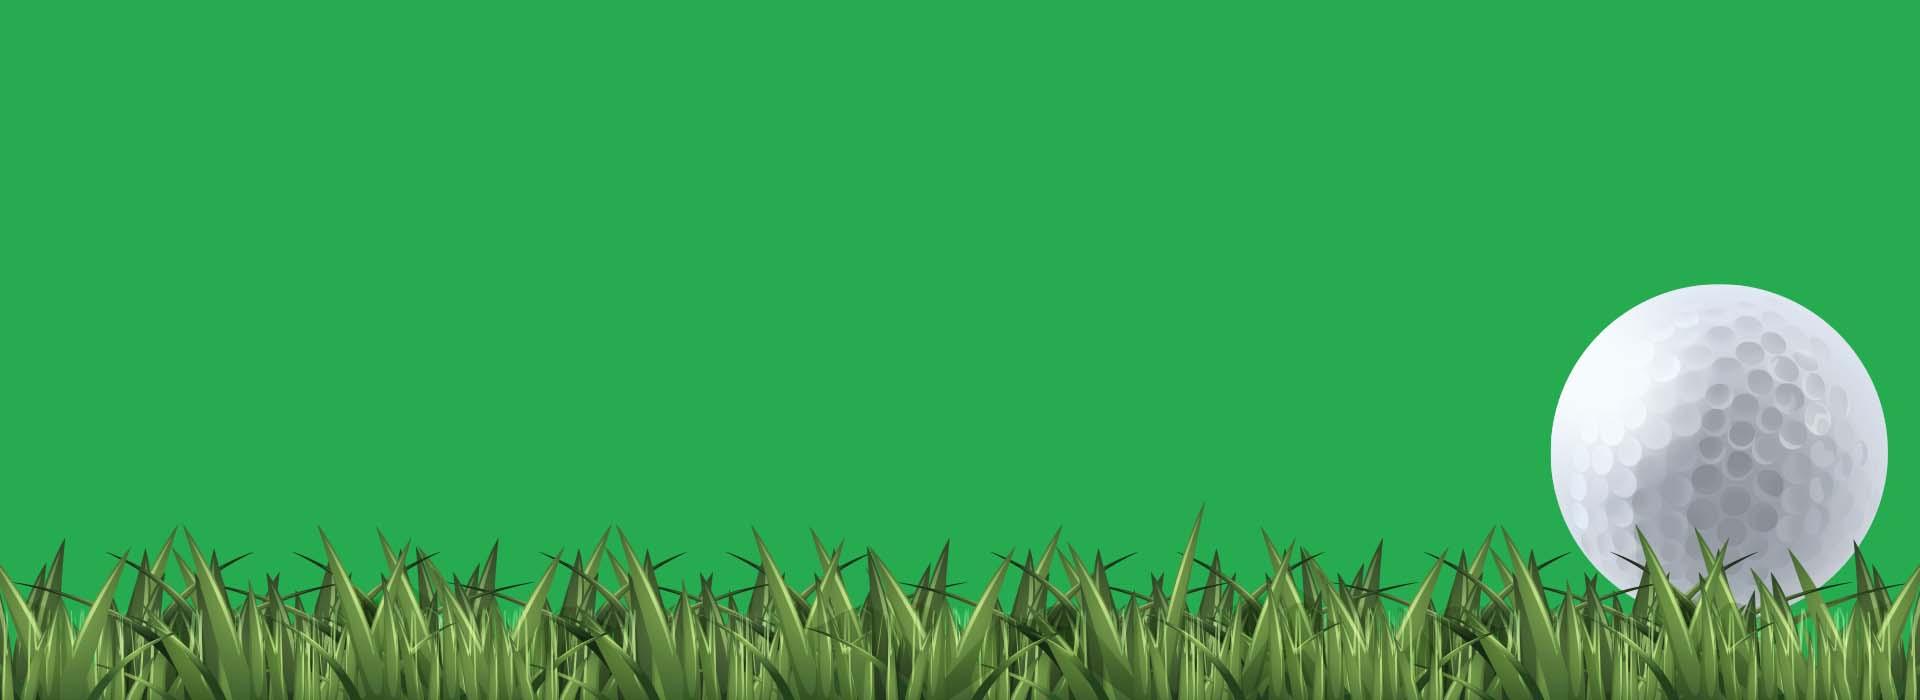 Green background with grass and golf ball for First Tee Golf Classic 